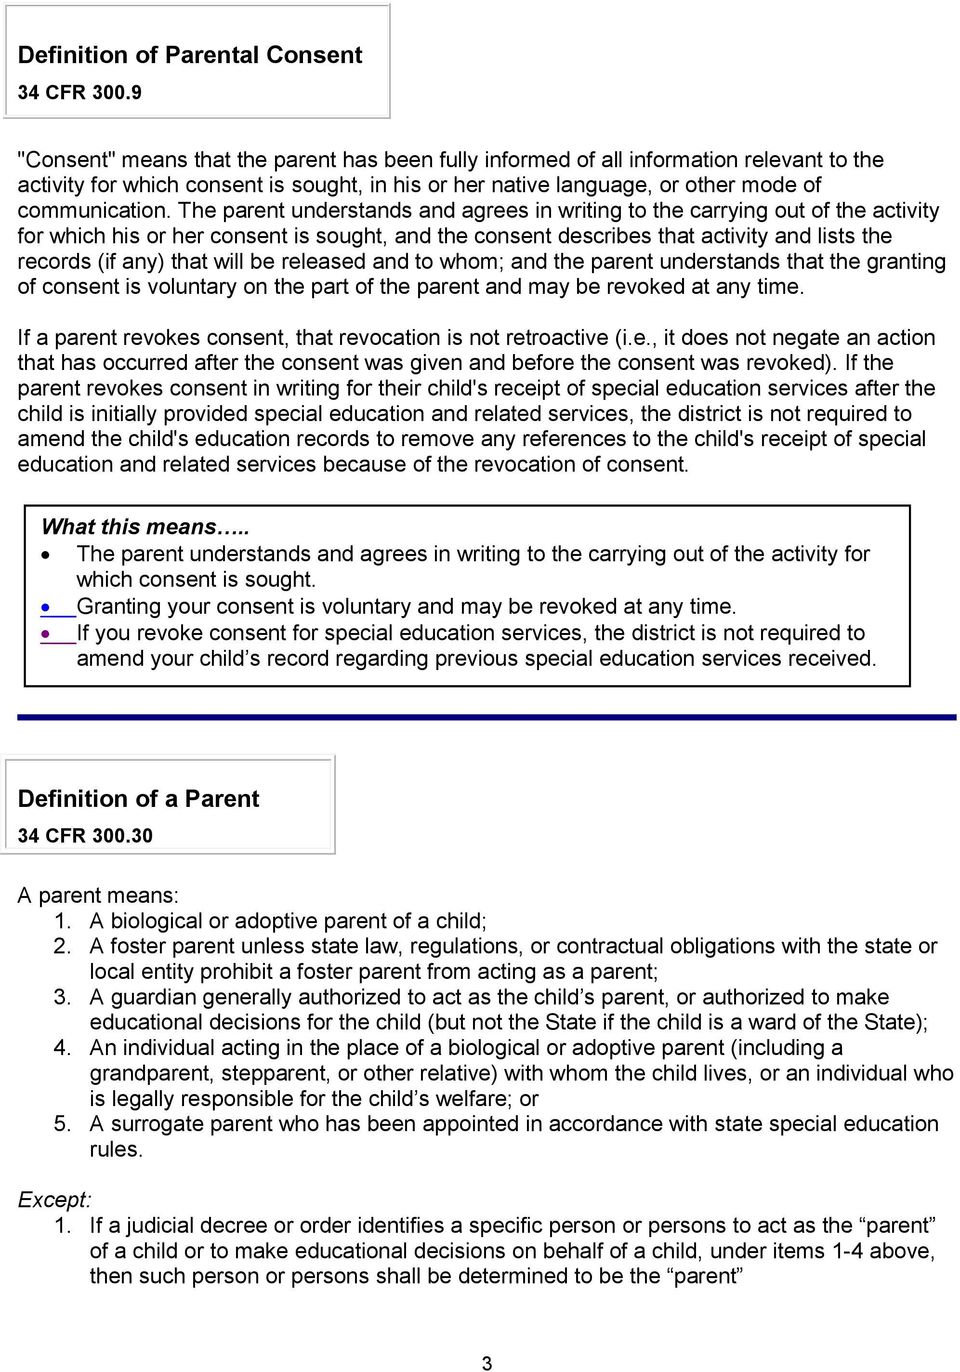 The parent understands and agrees in writing to the carrying out of the activity for which his or her consent is sought, and the consent describes that activity and lists the records (if any) that